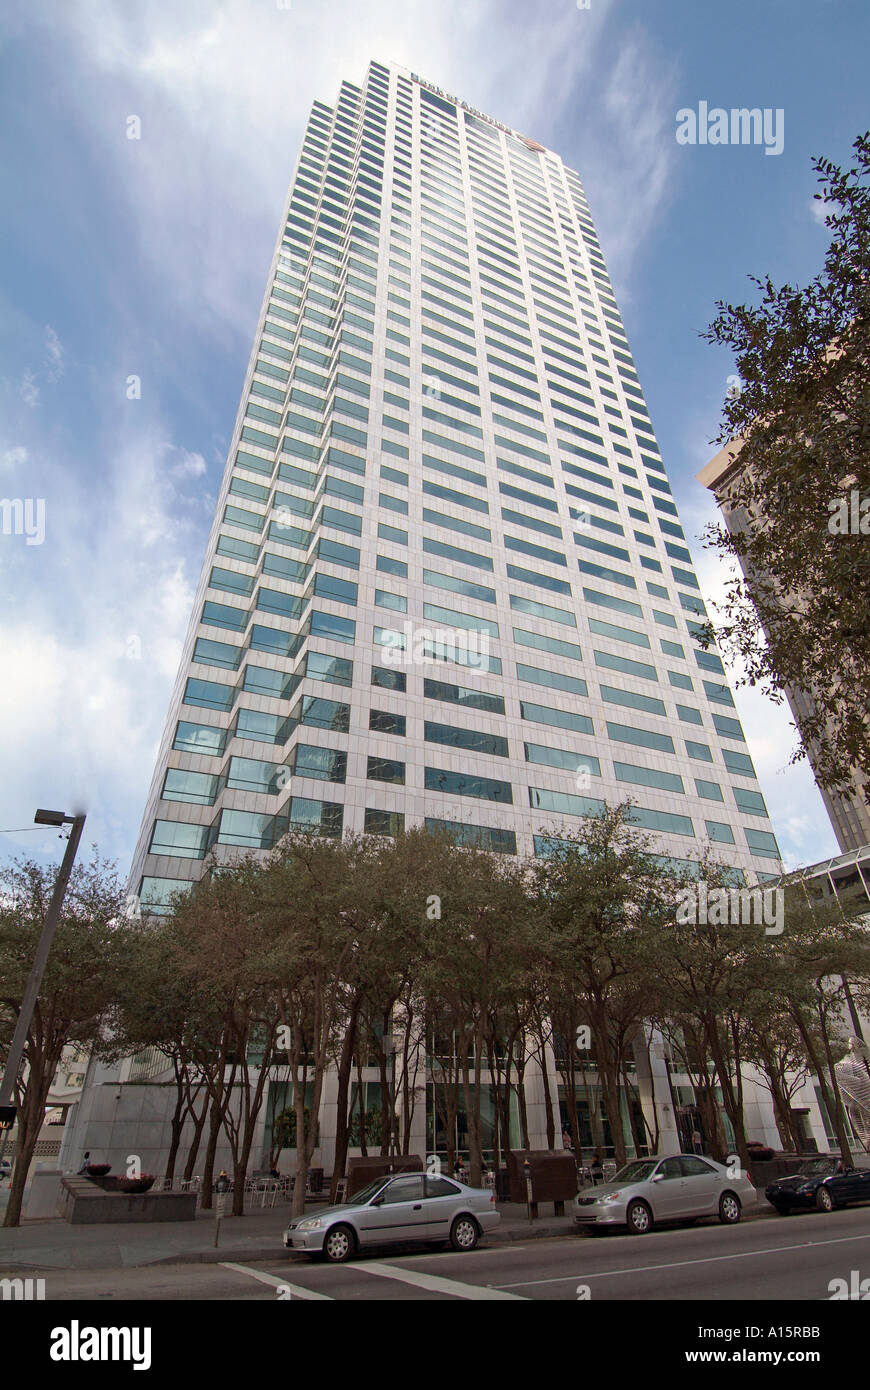 Downtown Tampa Florida Architecture tall buildings Stock Photo